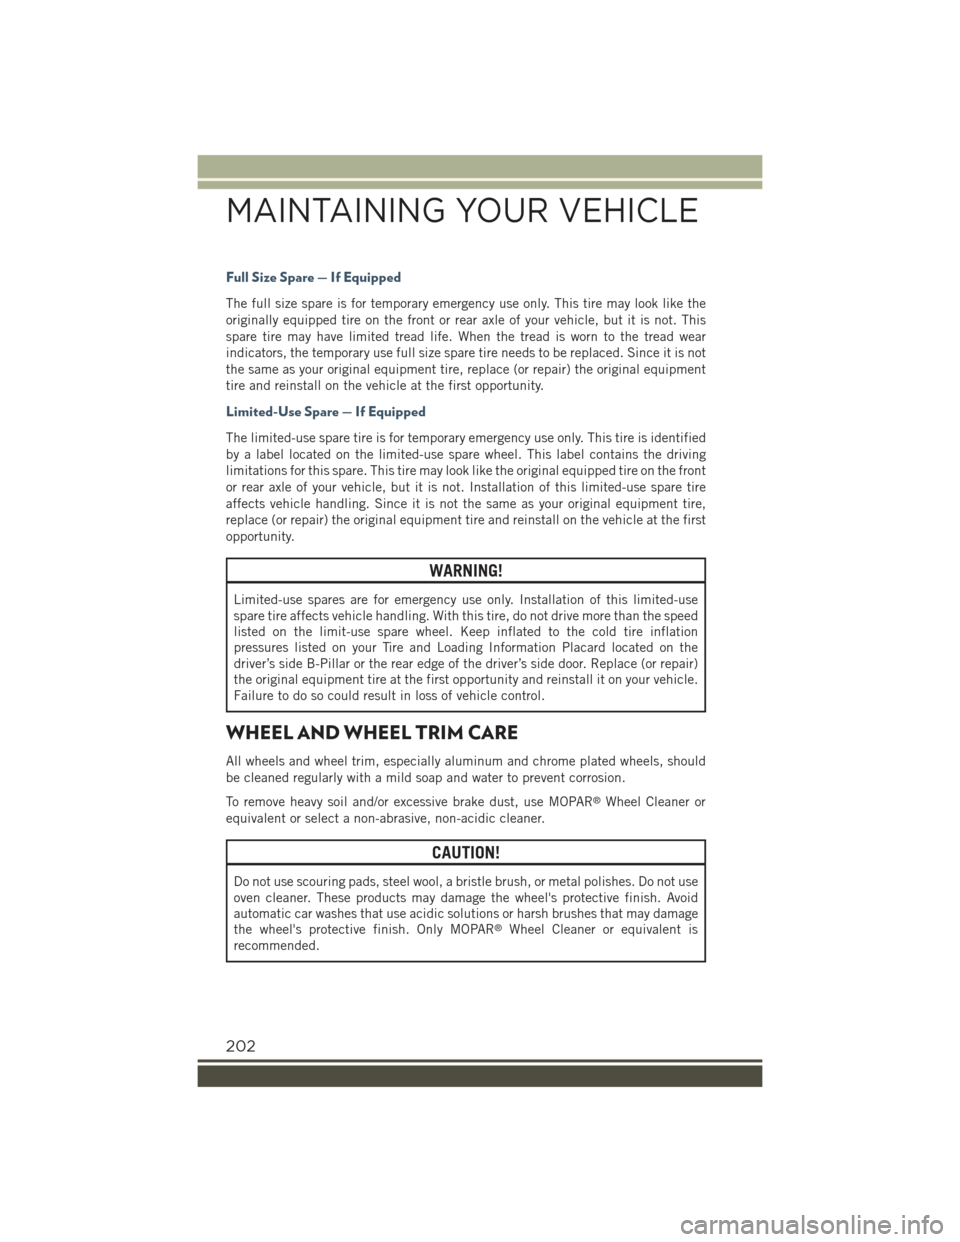 JEEP RENEGADE 2015 1.G Owners Manual Full Size Spare — If Equipped
The full size spare is for temporary emergency use only. This tire may look like the
originally equipped tire on the front or rear axle of your vehicle, but it is not. 